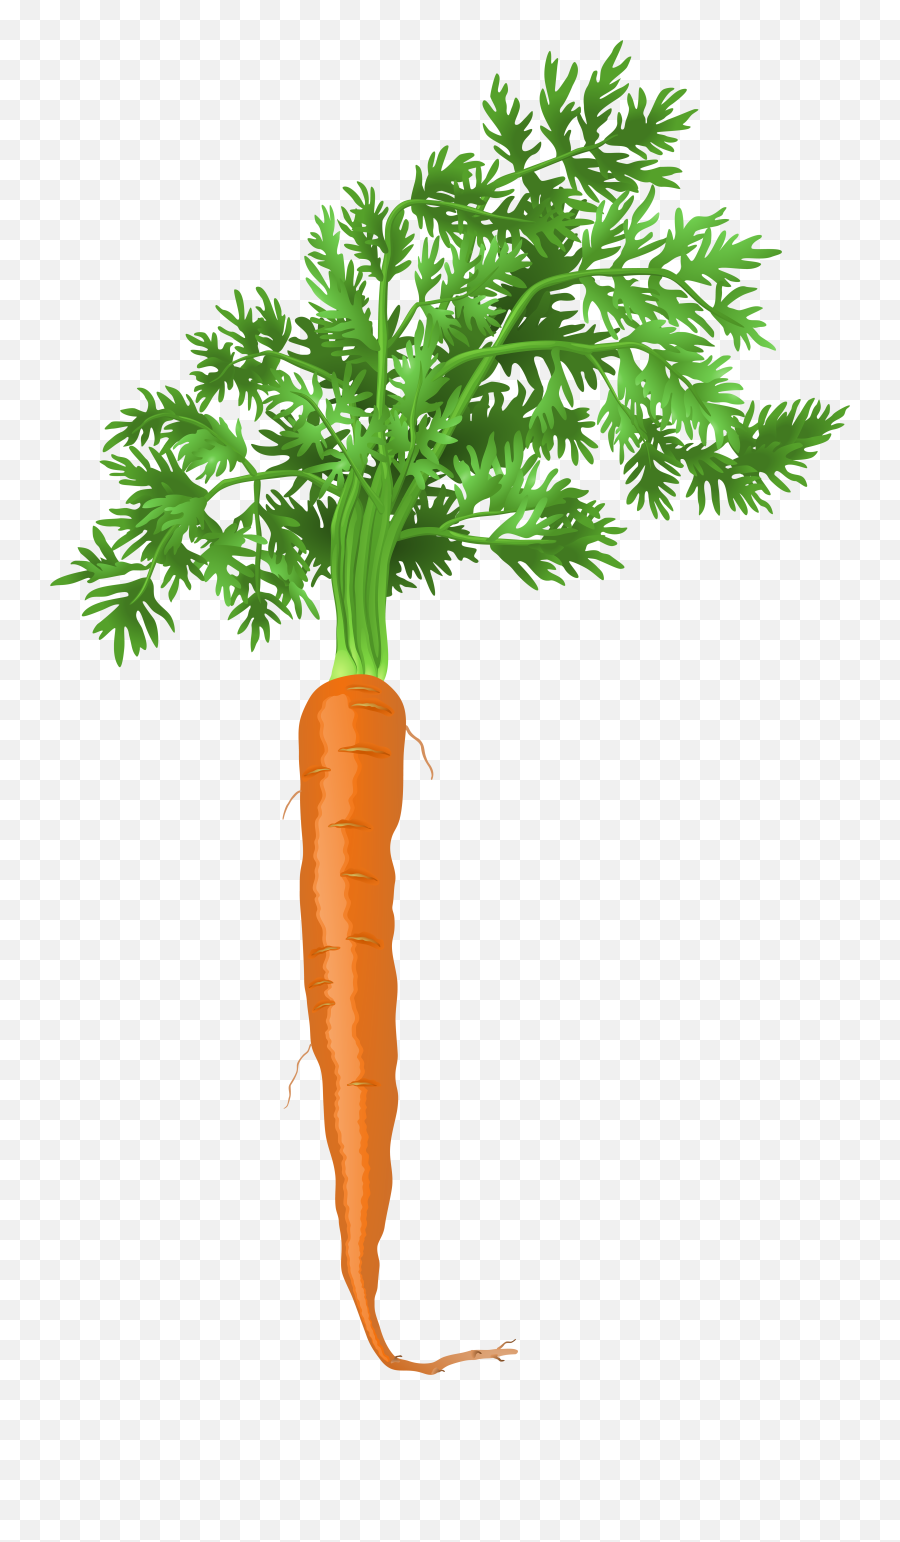 Carrot Clipart Carrot Plant Picture 2340955 Carrot Clipart - Carrot Png Emoji,Carrot Clipart